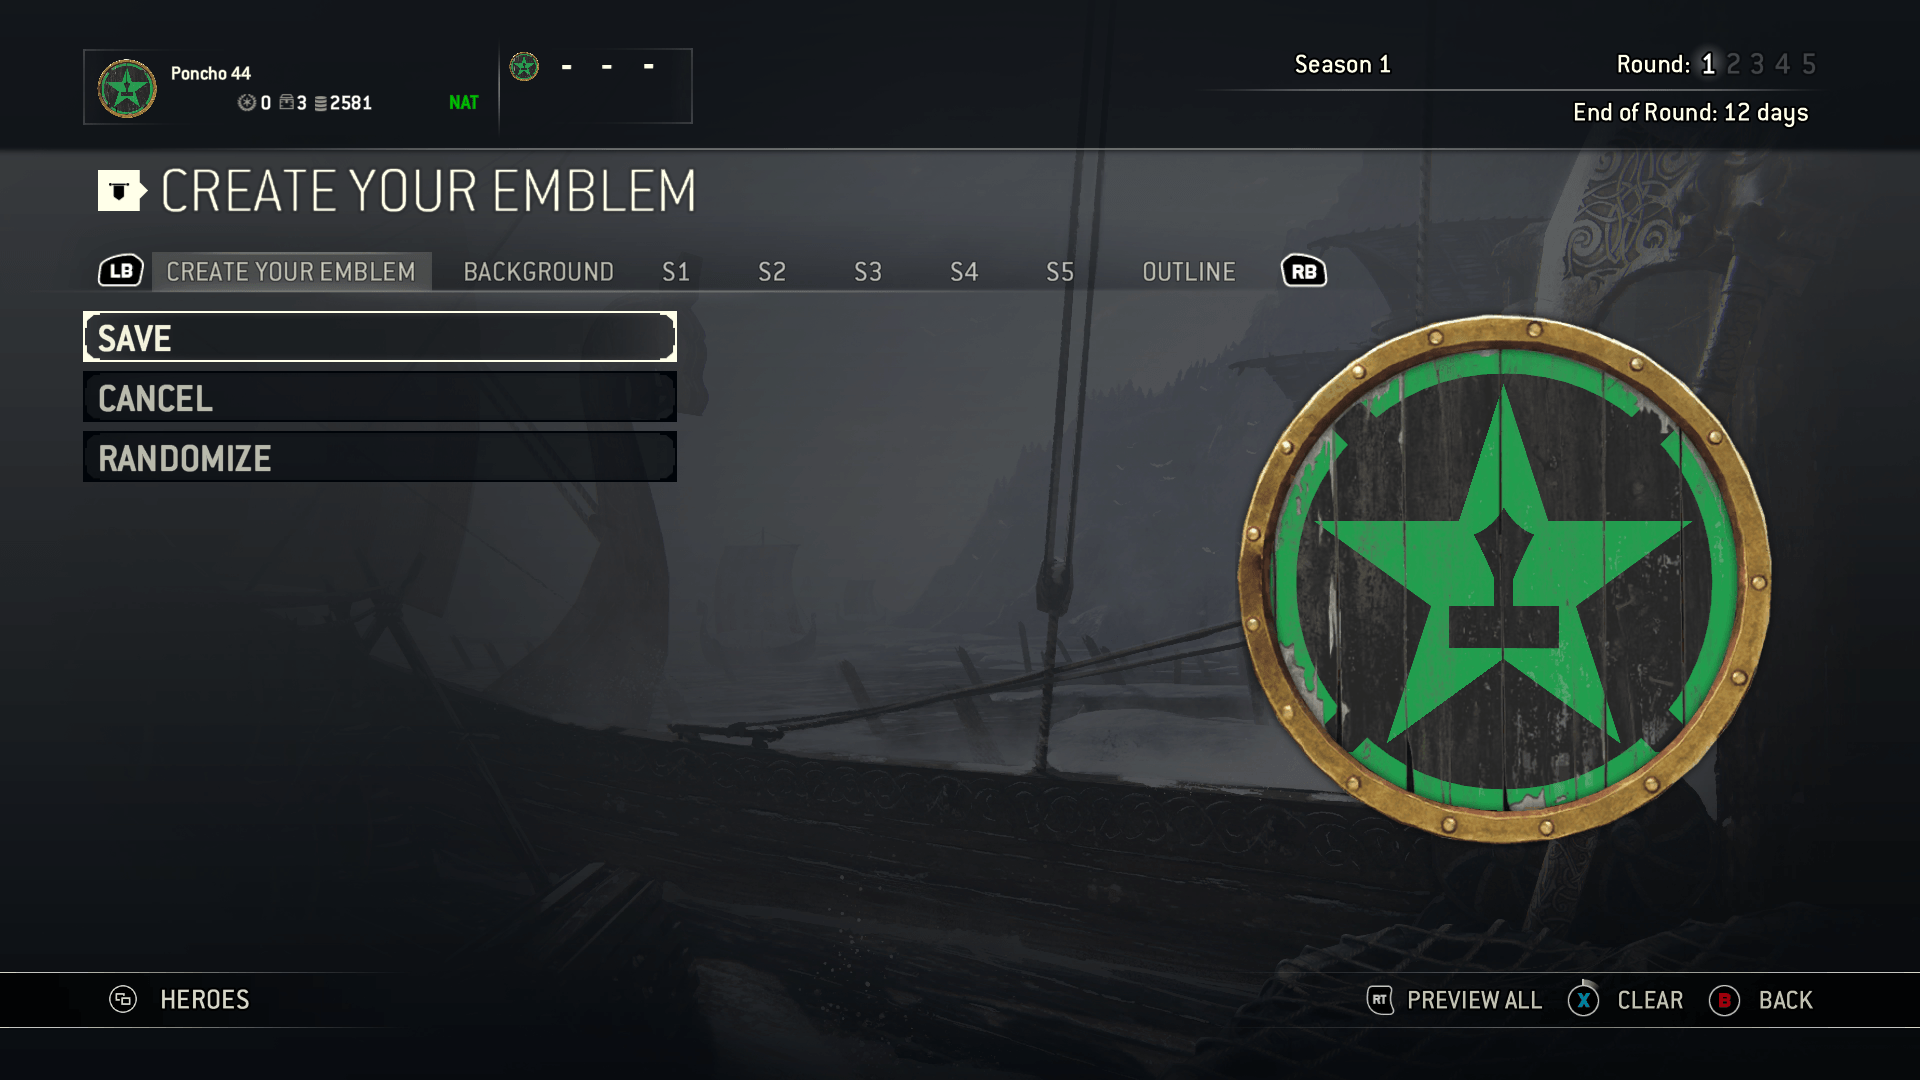 Achievement Hunter Logo - I made the Achievement Hunter logo in For Honor as my emblem. :D ...